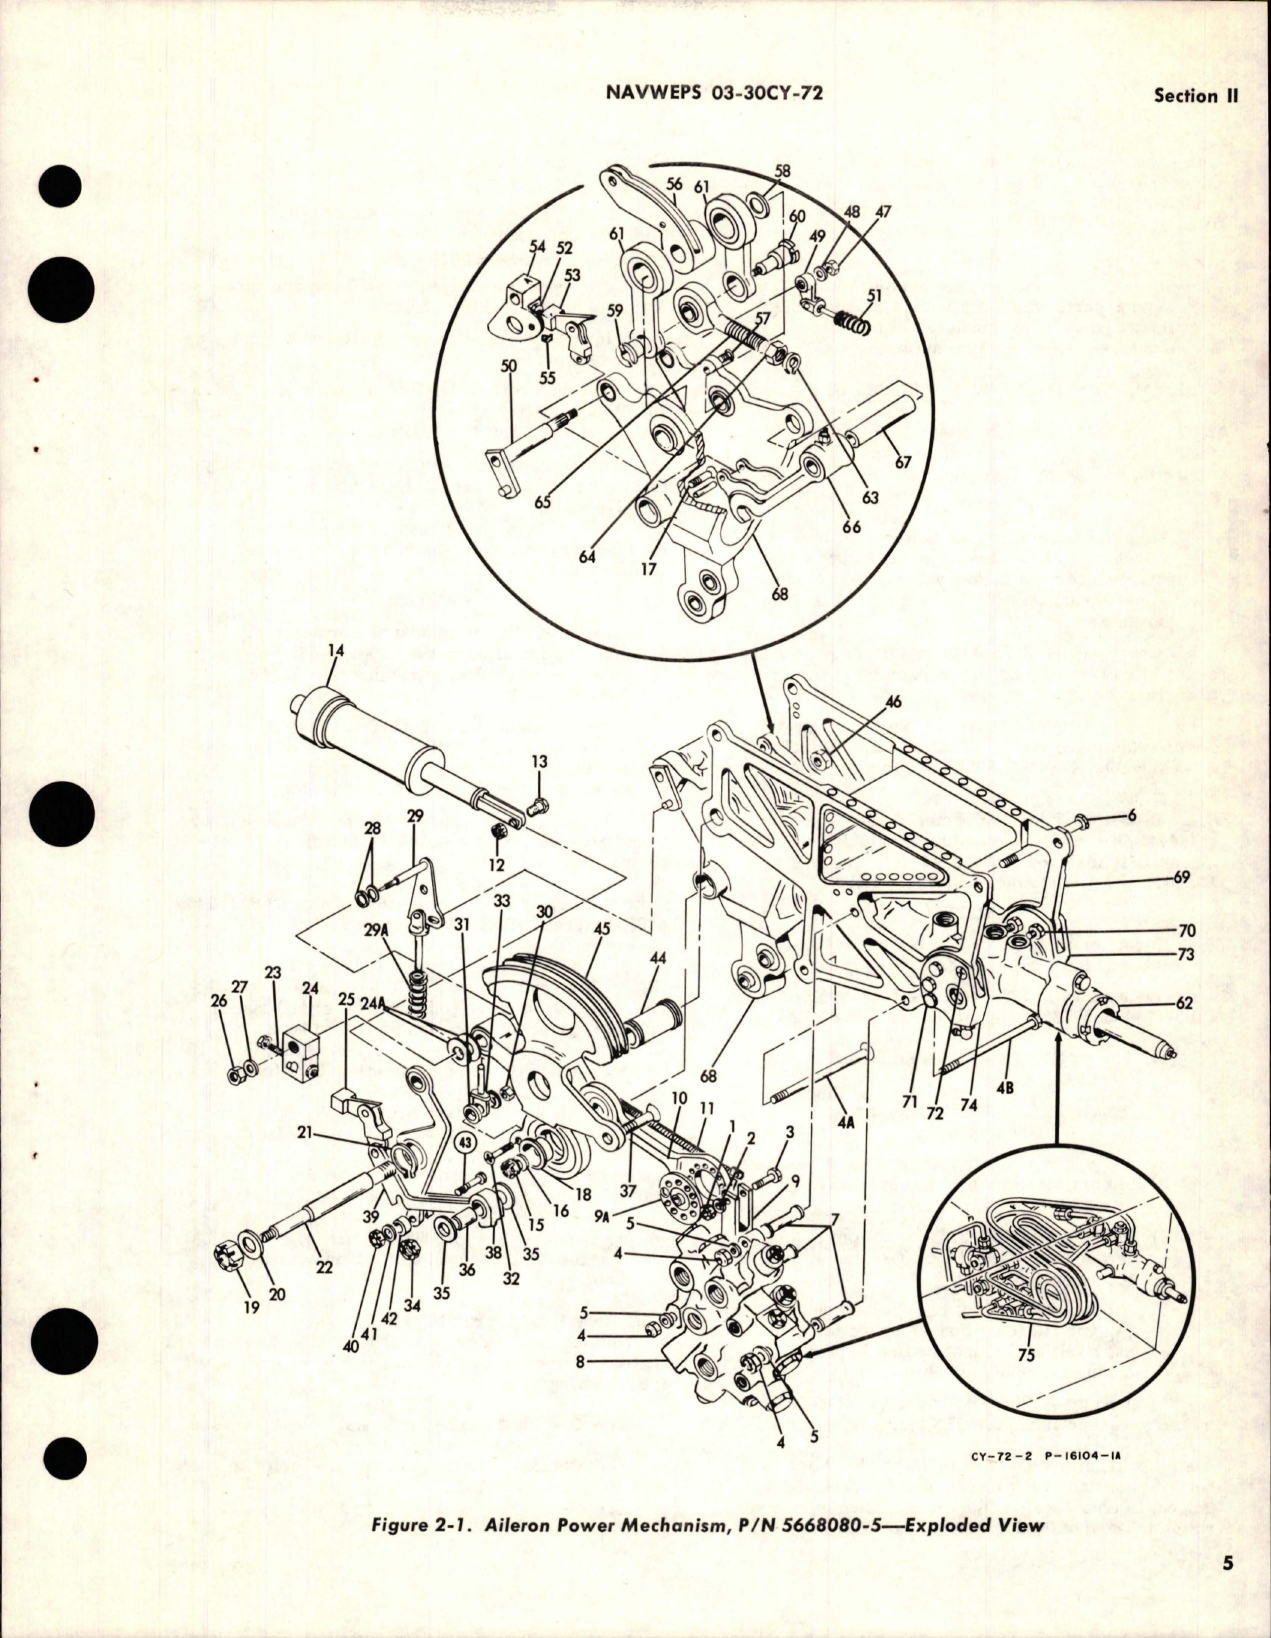 Sample page 9 from AirCorps Library document: Overhaul Instructions for Aileron Power Mechanism 